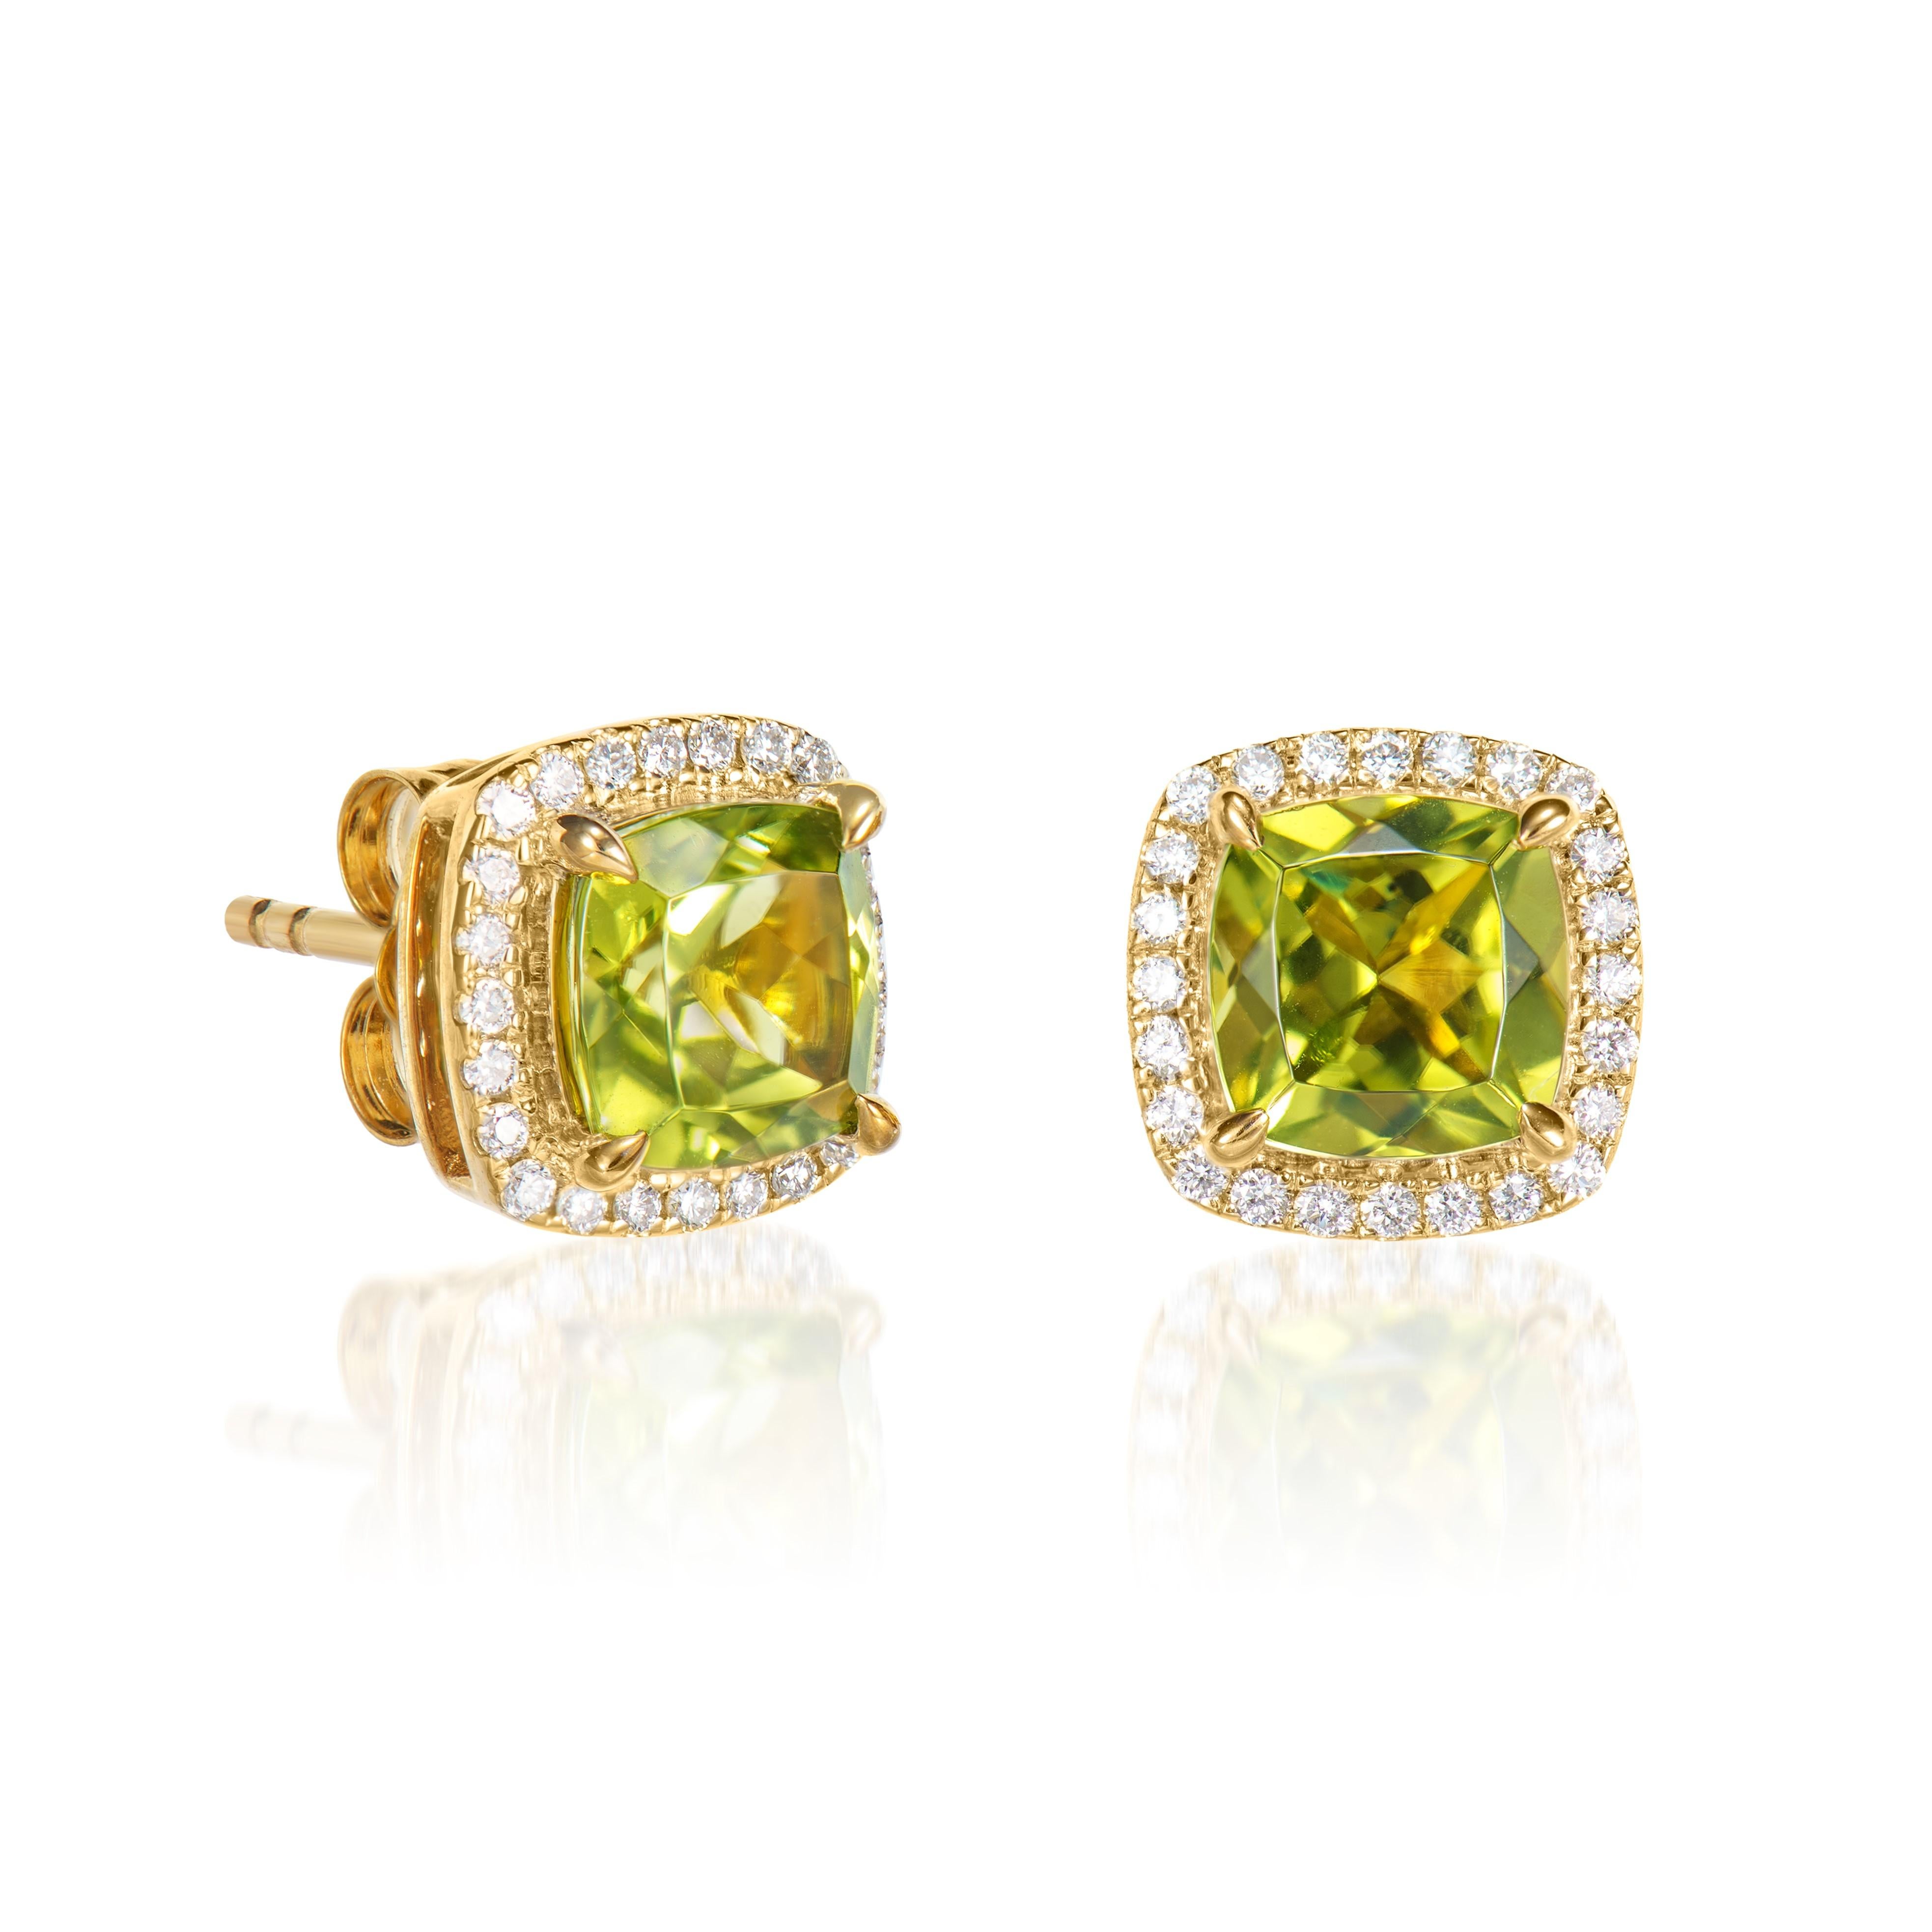 Presented A lovely collection of gems, including Amethyst, Peridot, Rhodolite, Sky Blue Topaz, Swiss Blue Topaz and Morganite is perfect for people who value quality and want to wear it to any occasion or celebration. The yellow gold Peridot Stud